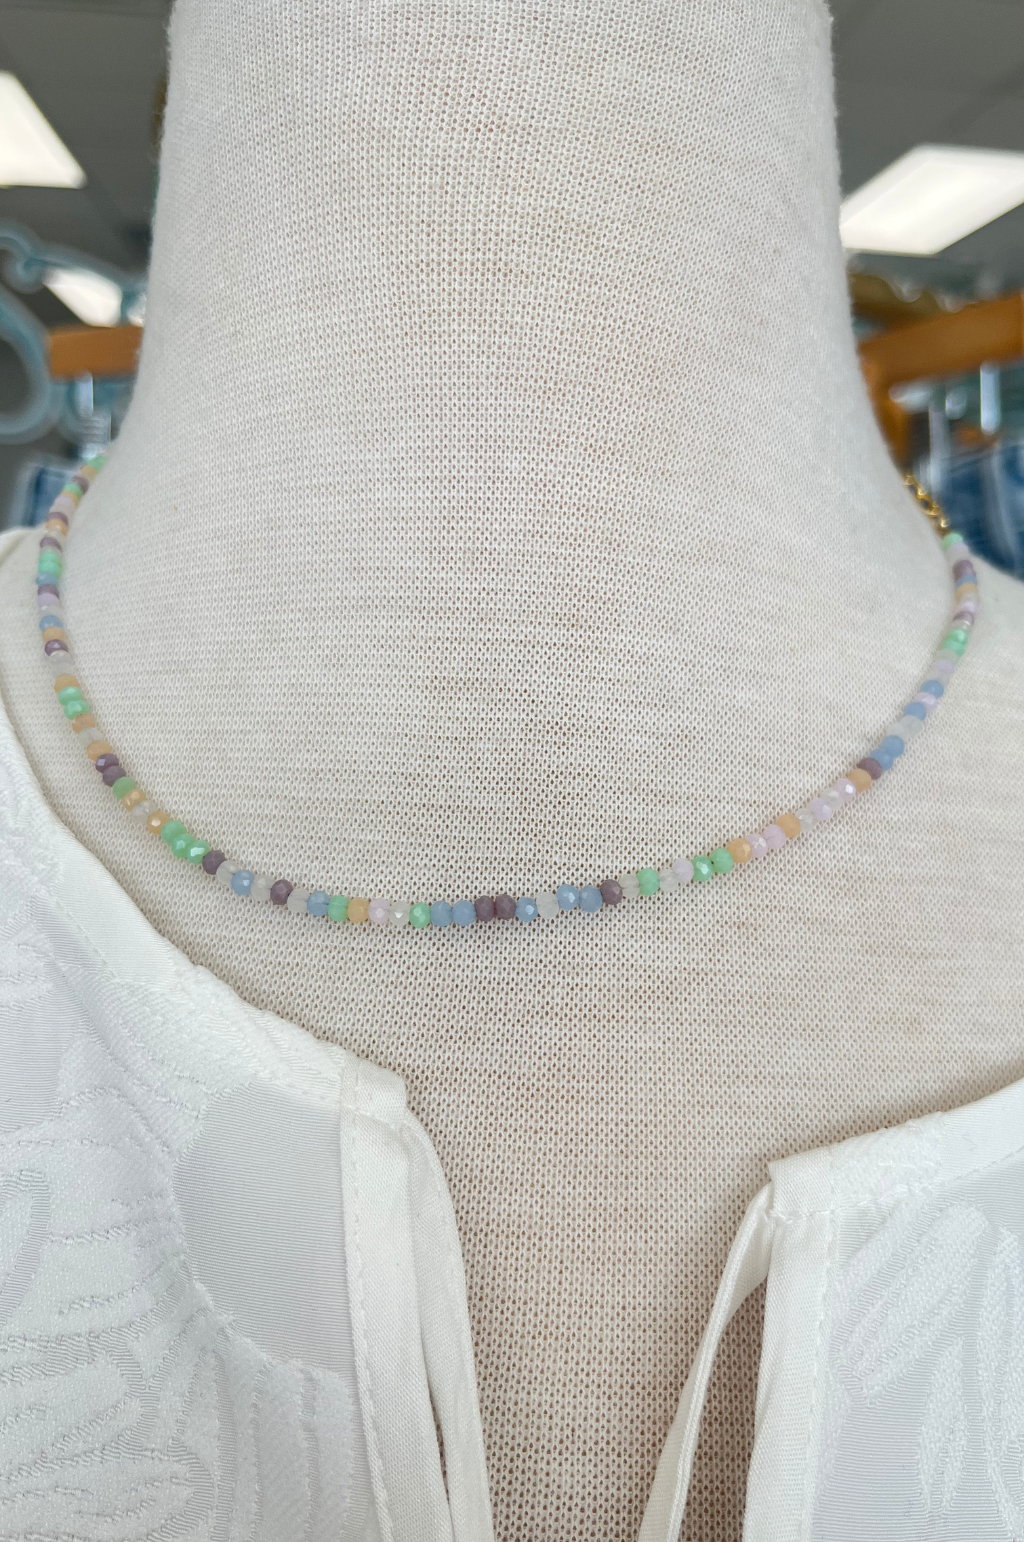 The Colors of Summer Necklace by Annie Claire Designs - SoSis